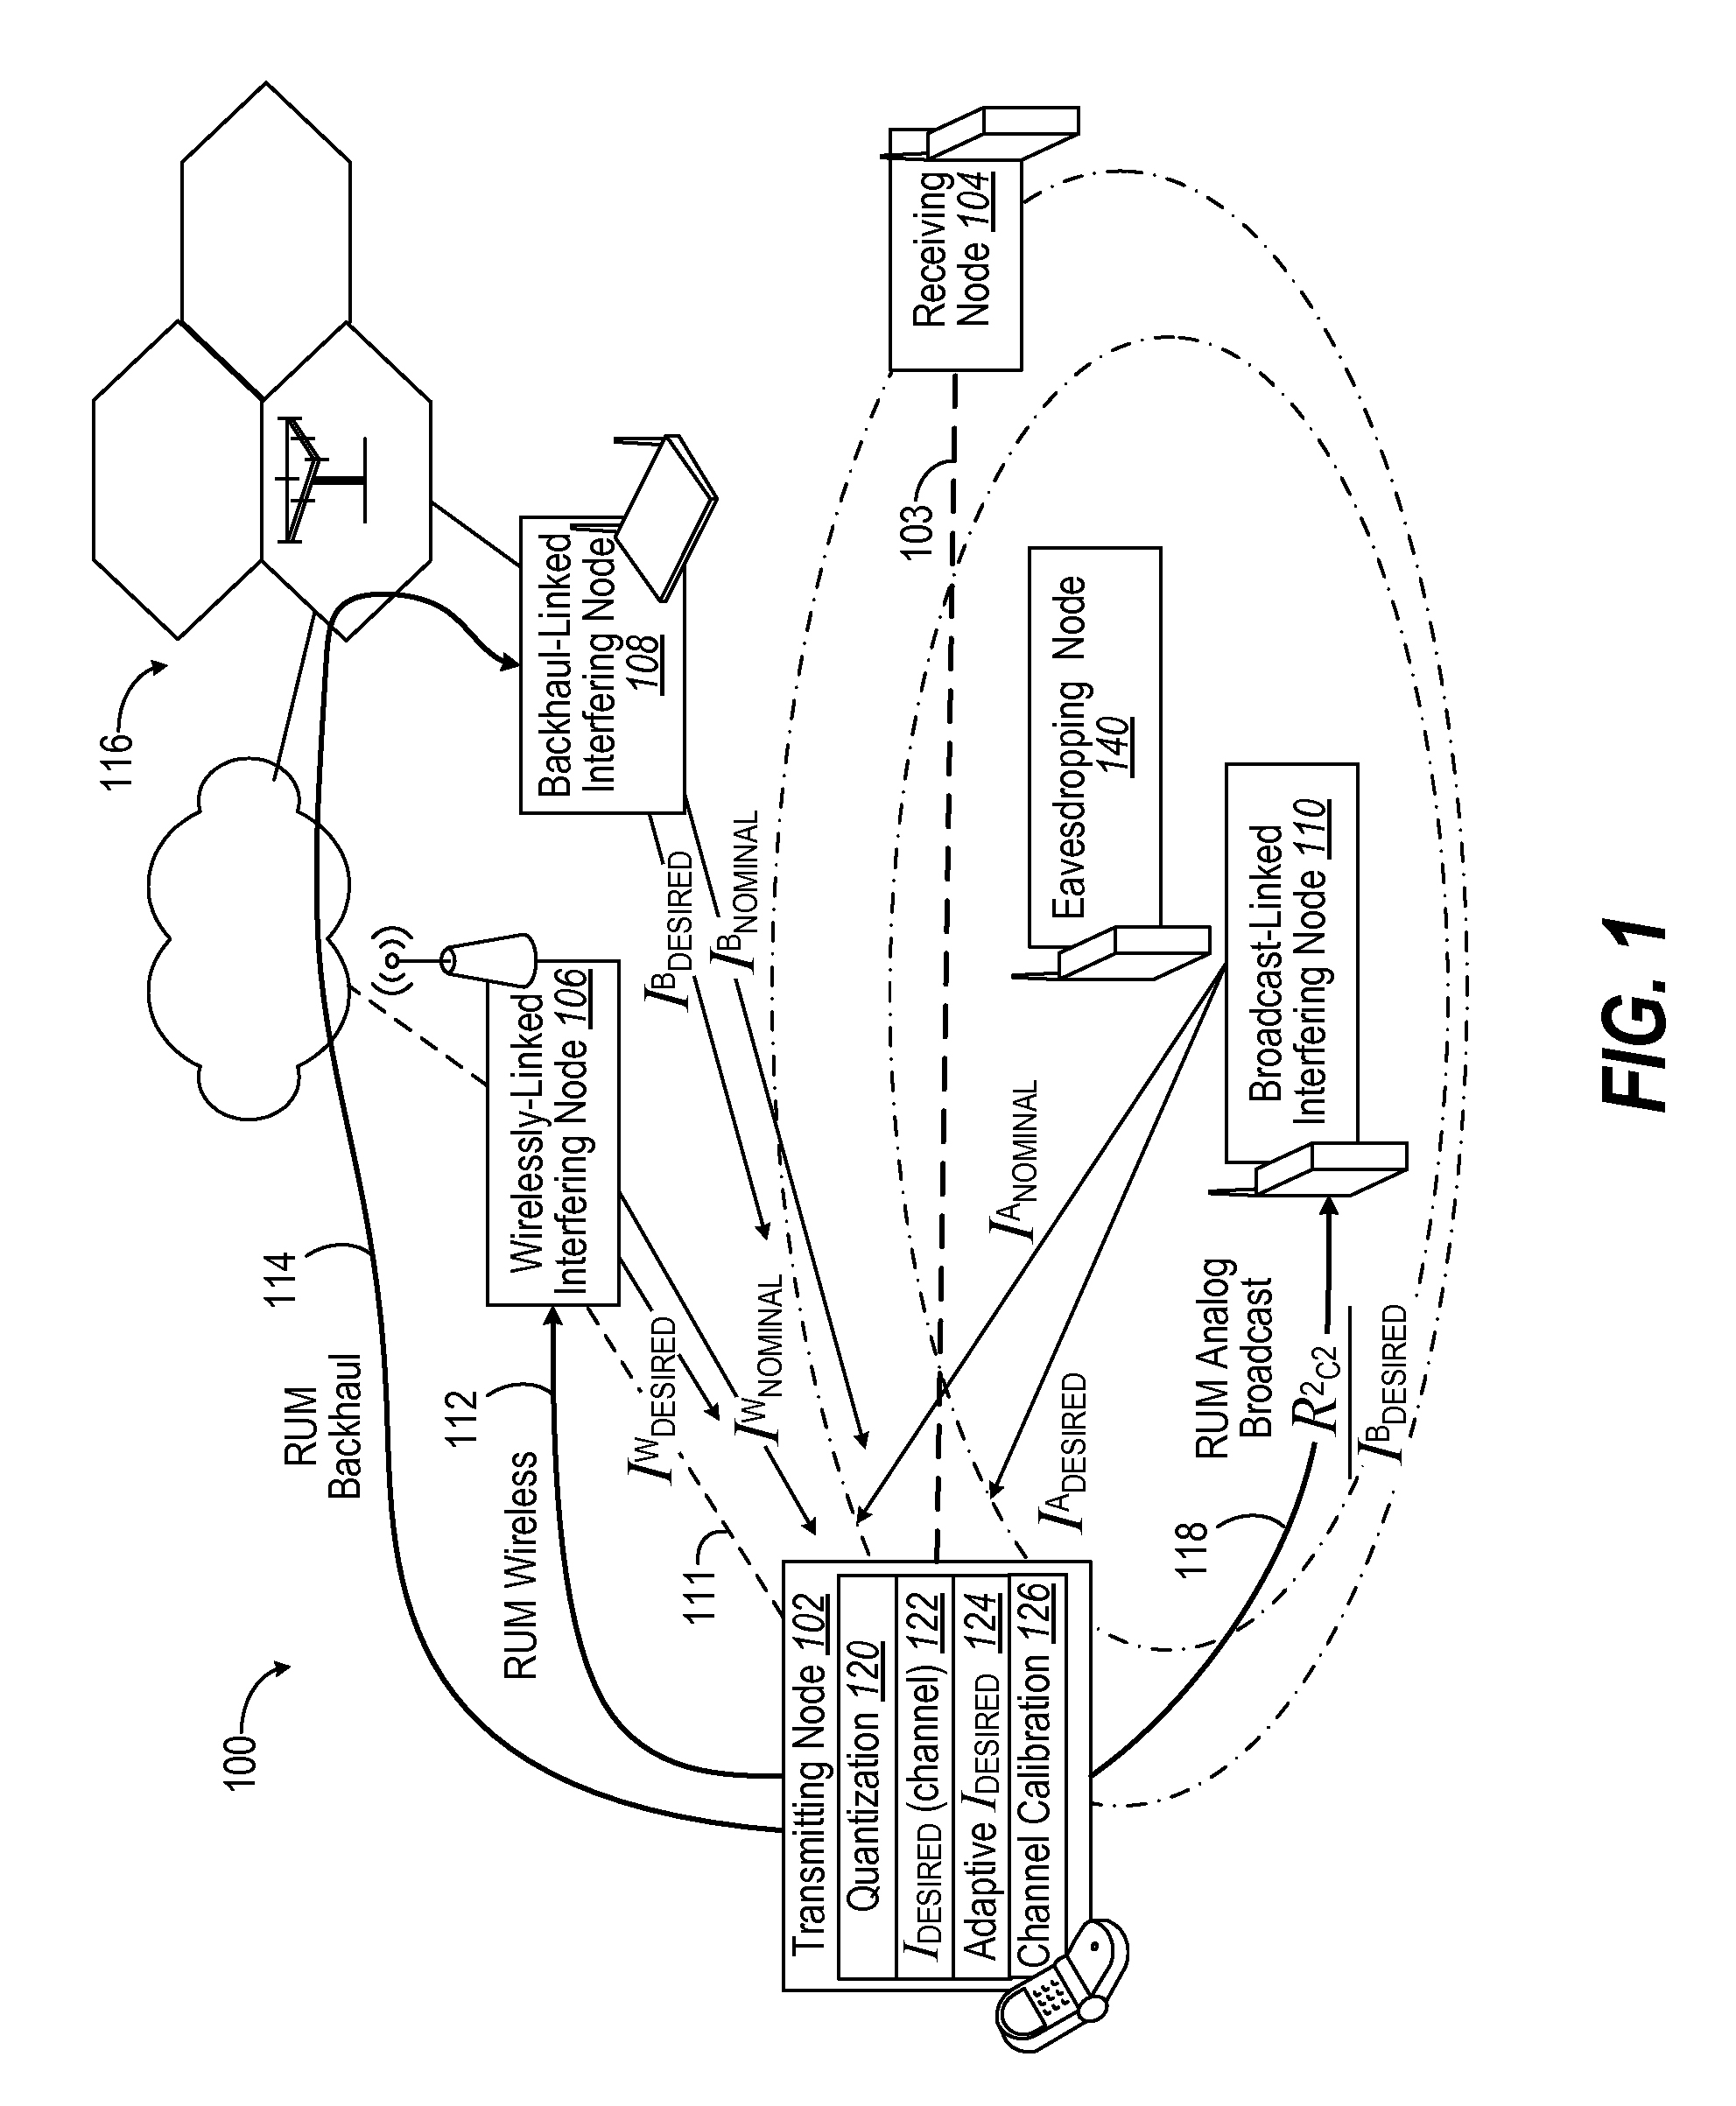 Method and system to indicate a desired transmit power and soft power control in a wireless network